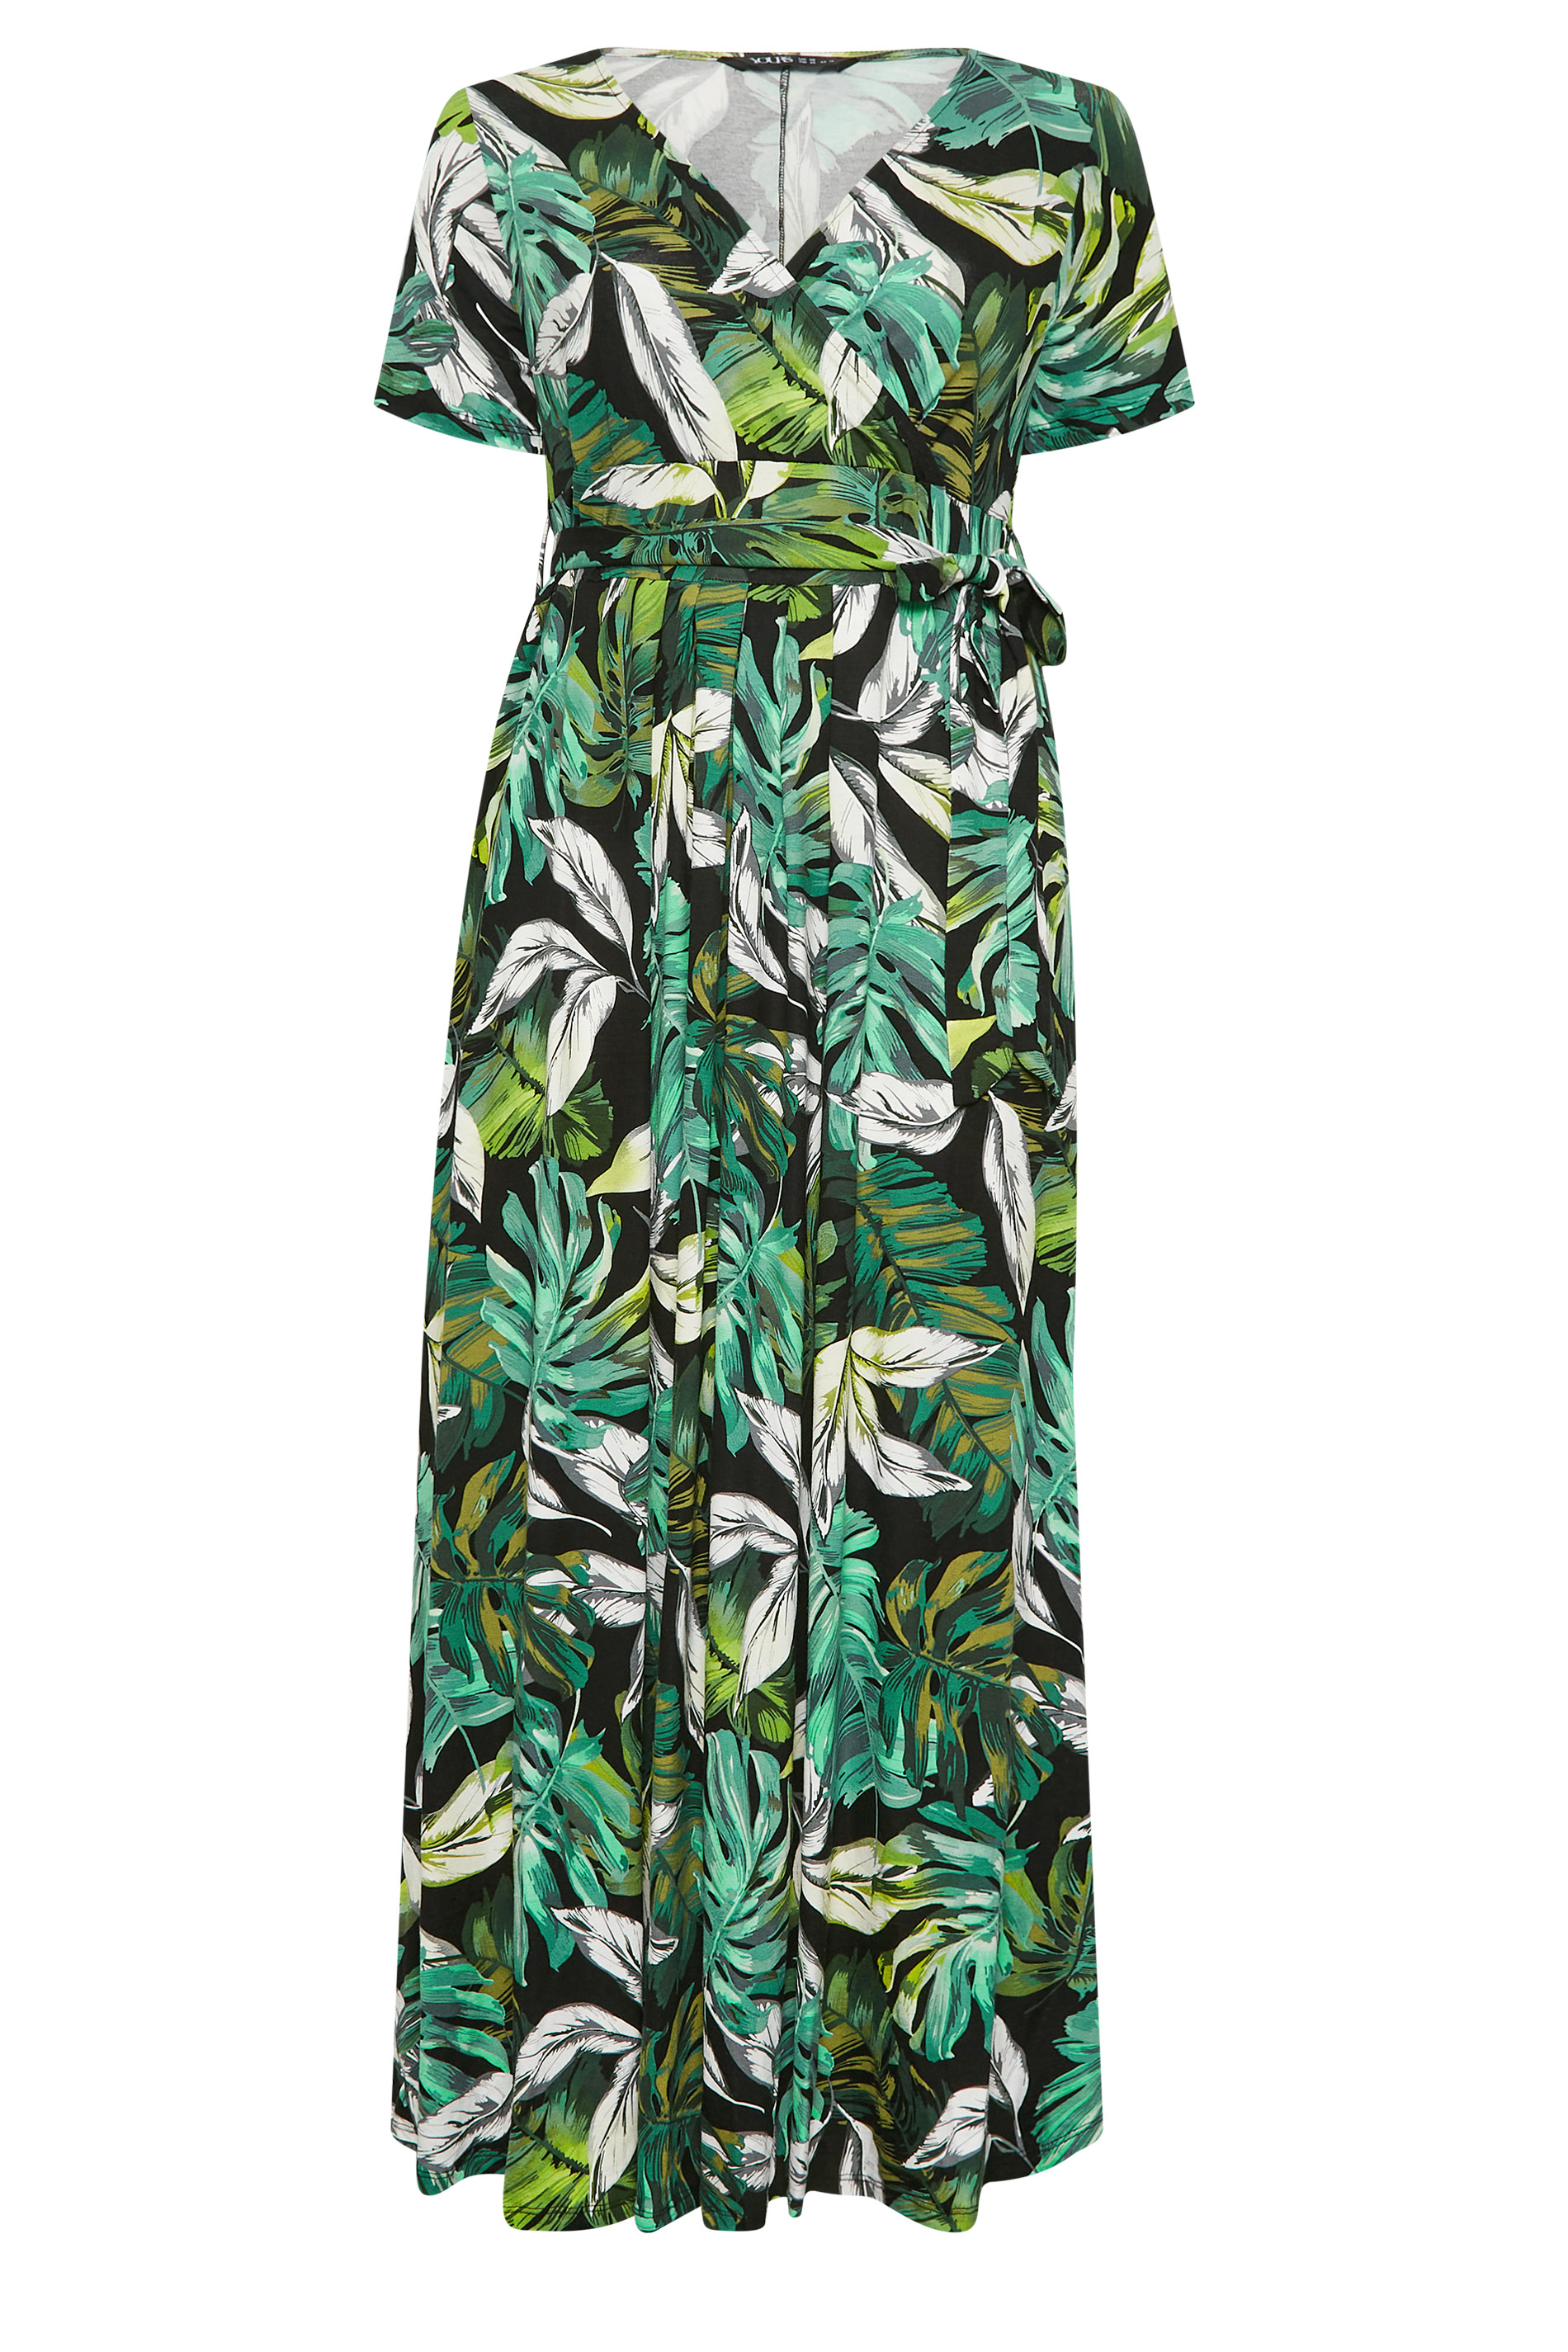 YOURS Curve Plus Size Green Leaf Print Maxi Dress | Yours Clothing